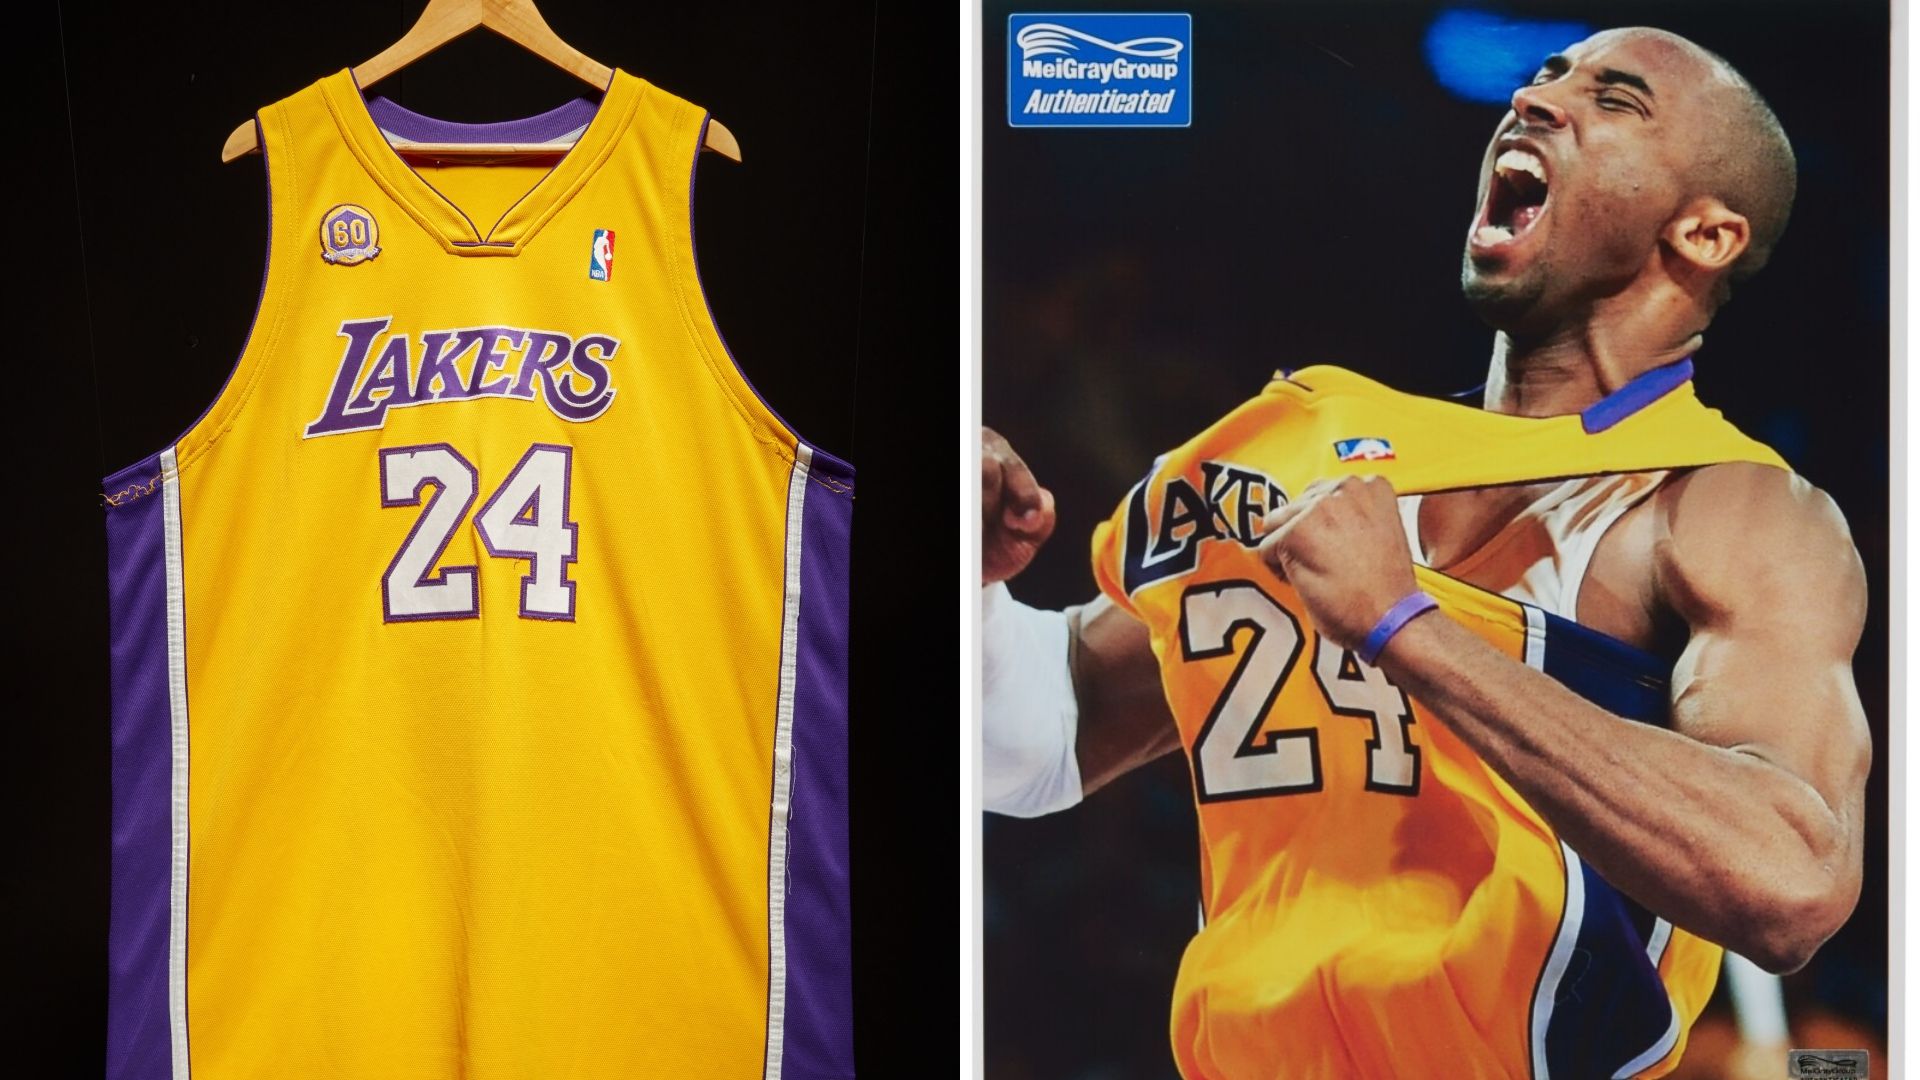 A Jersey Worn By Kobe Bryant Is Expected To Fetch $7M At Auction